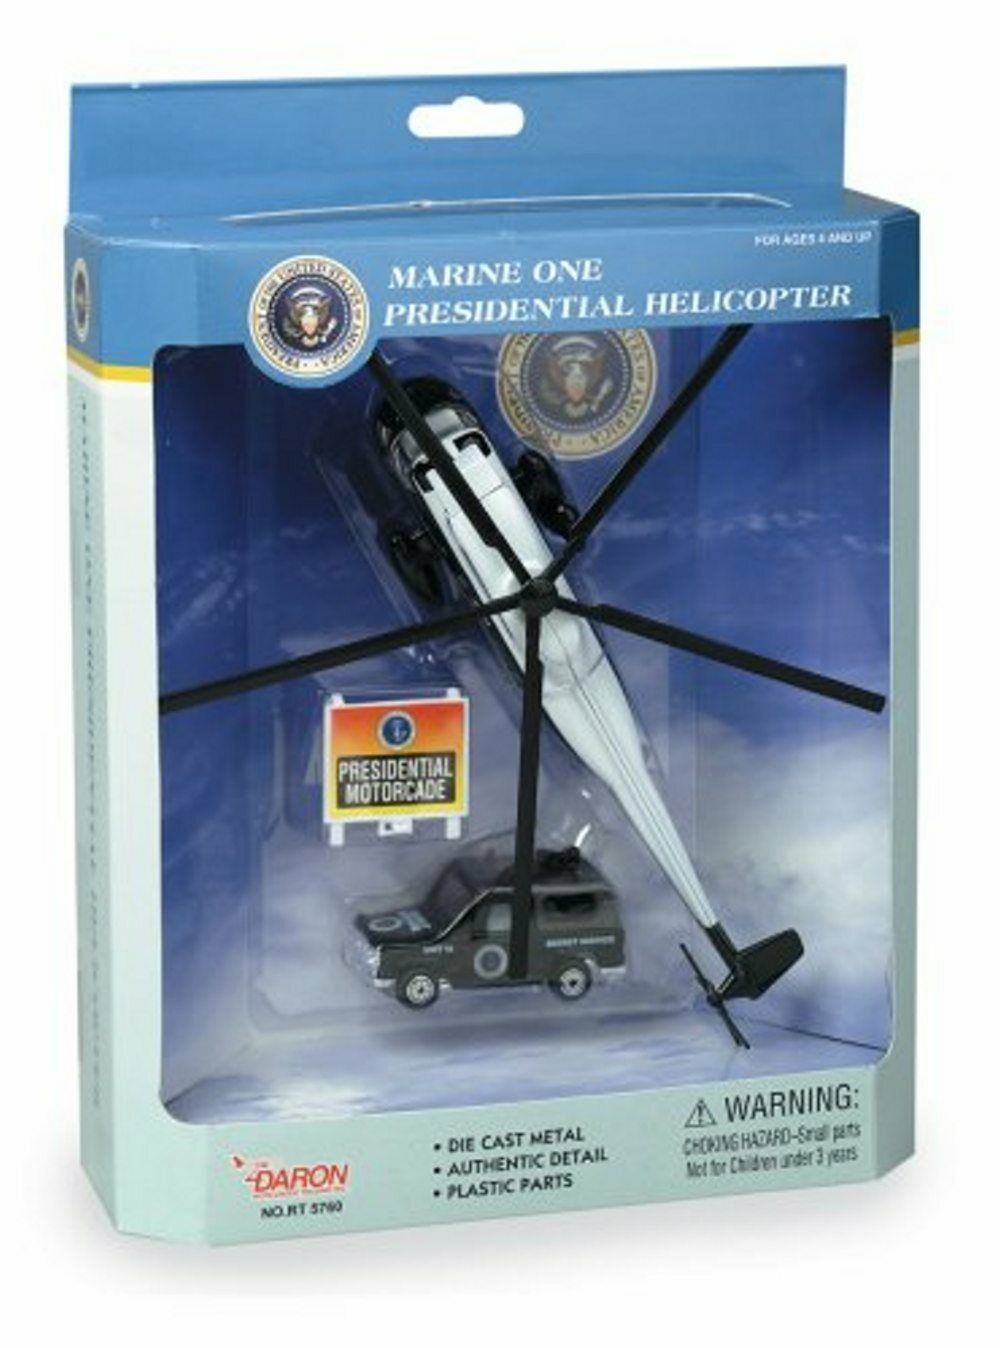 Marine One Presidential Helicopter Playset